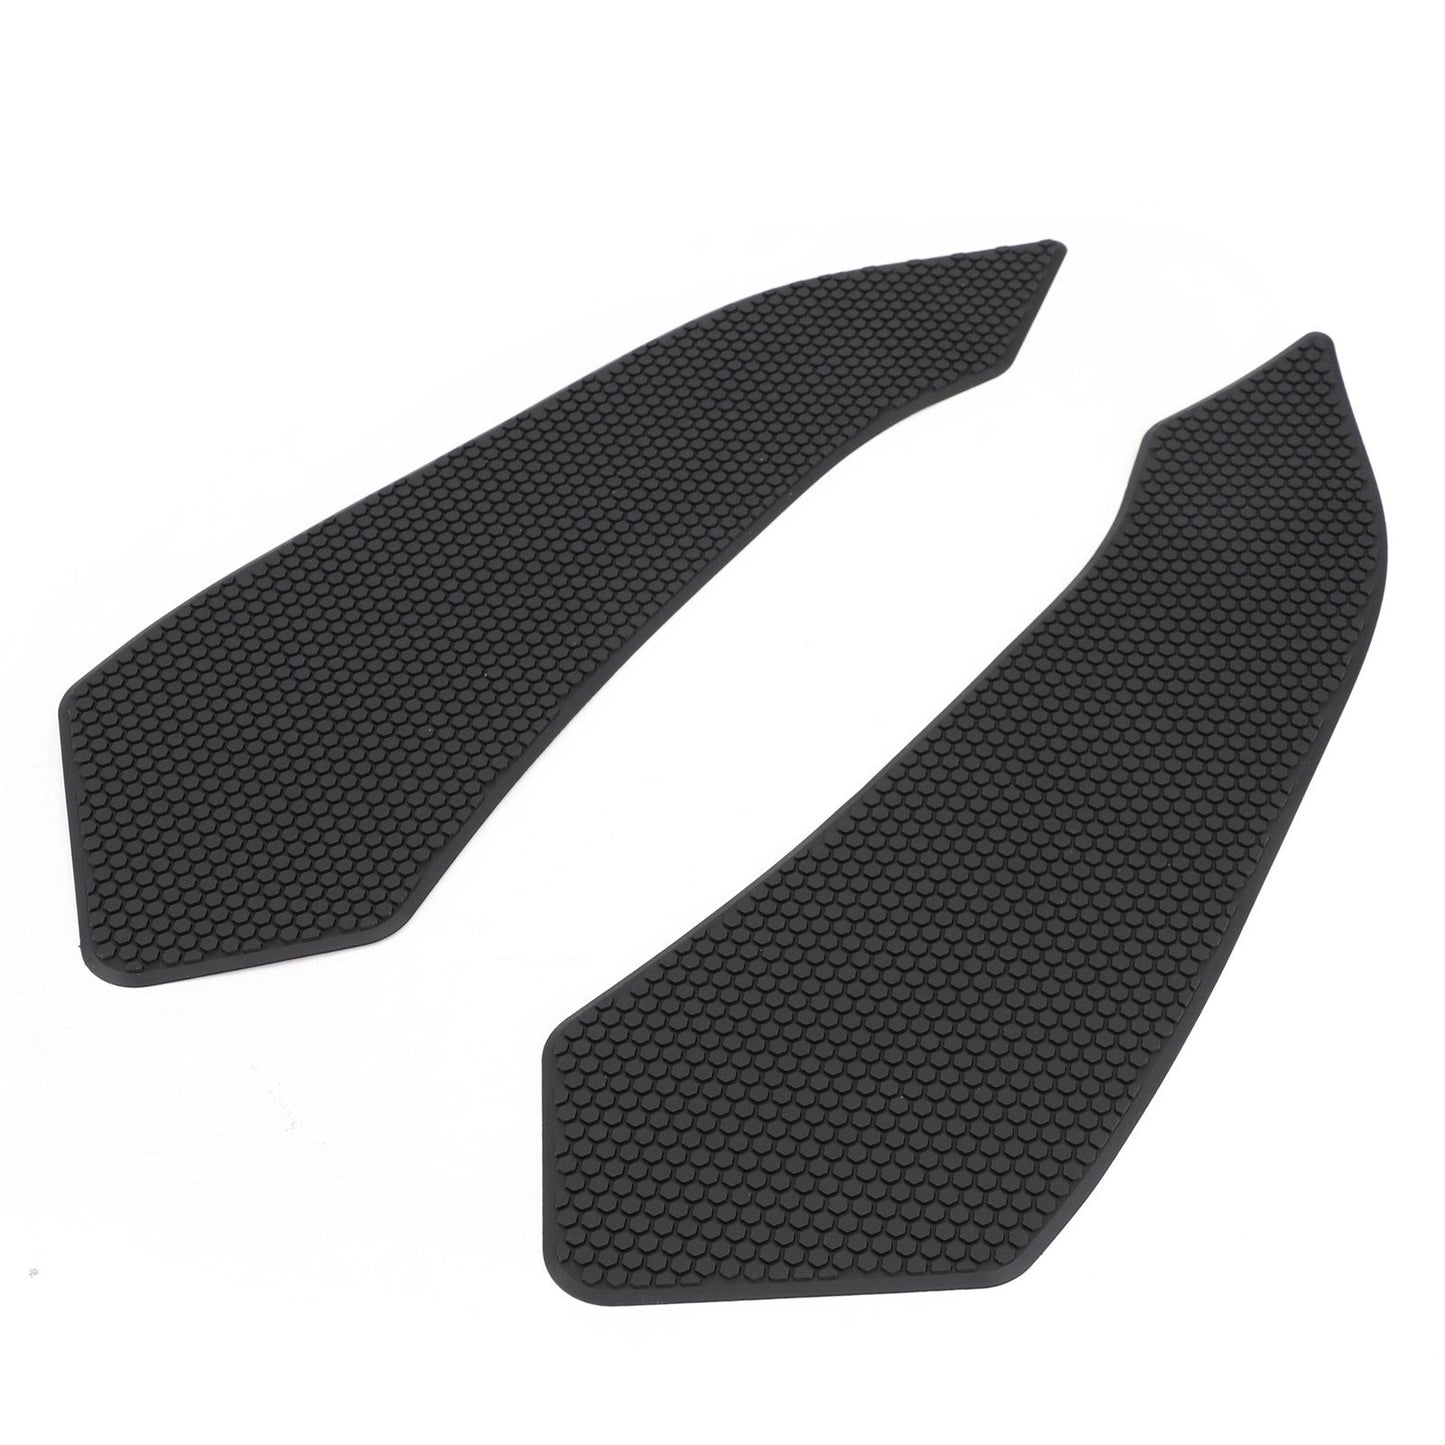 2X Side Tank Traction Grips Pads Fit For Multistrada Enduro 1200 16-18 Rubber